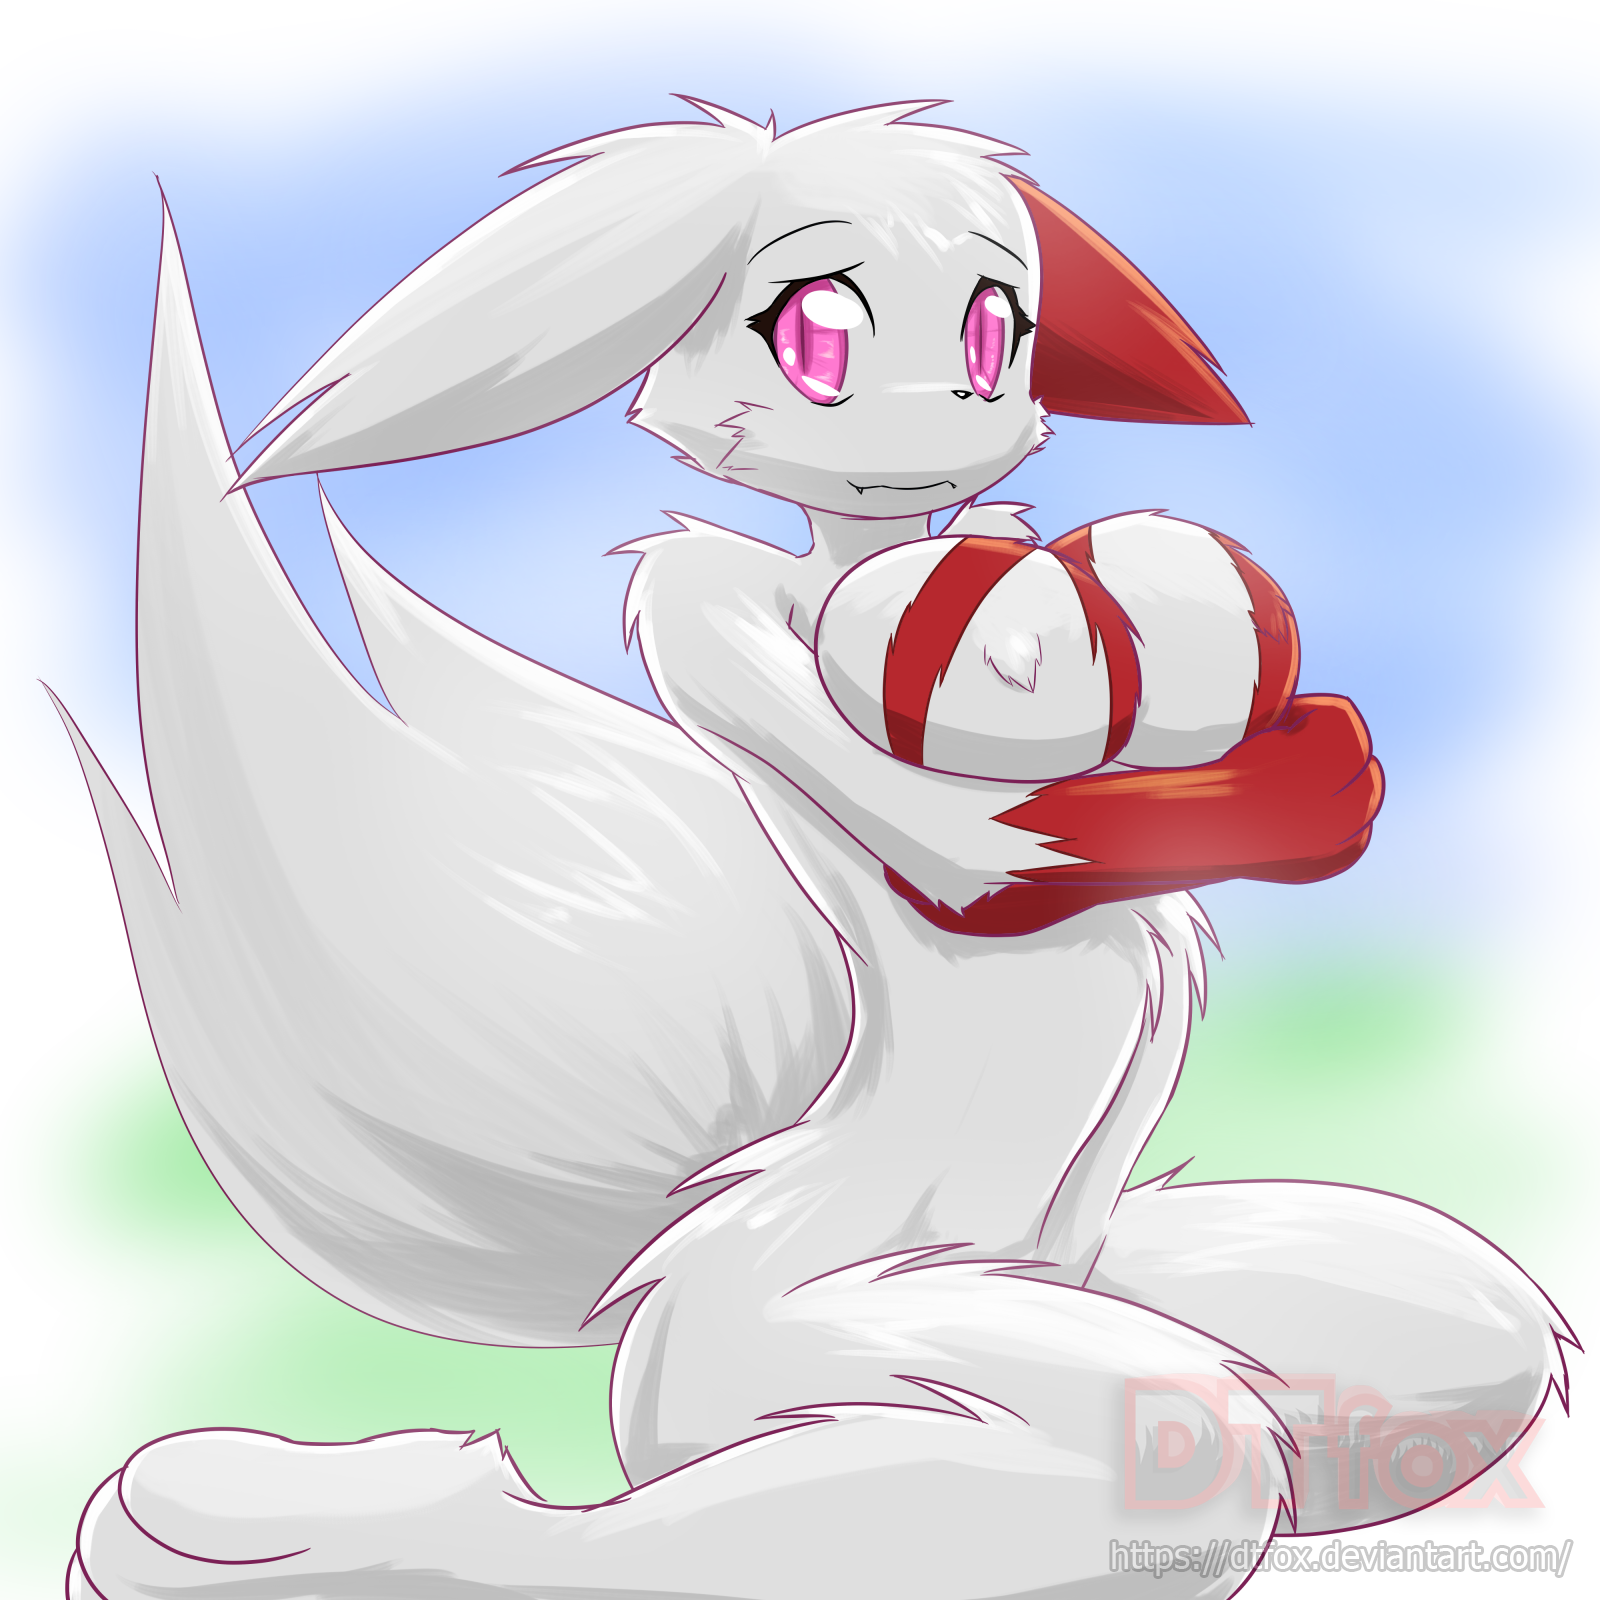 A heavily busty zangoose kneeling and holding her breasts as she smiles innocently